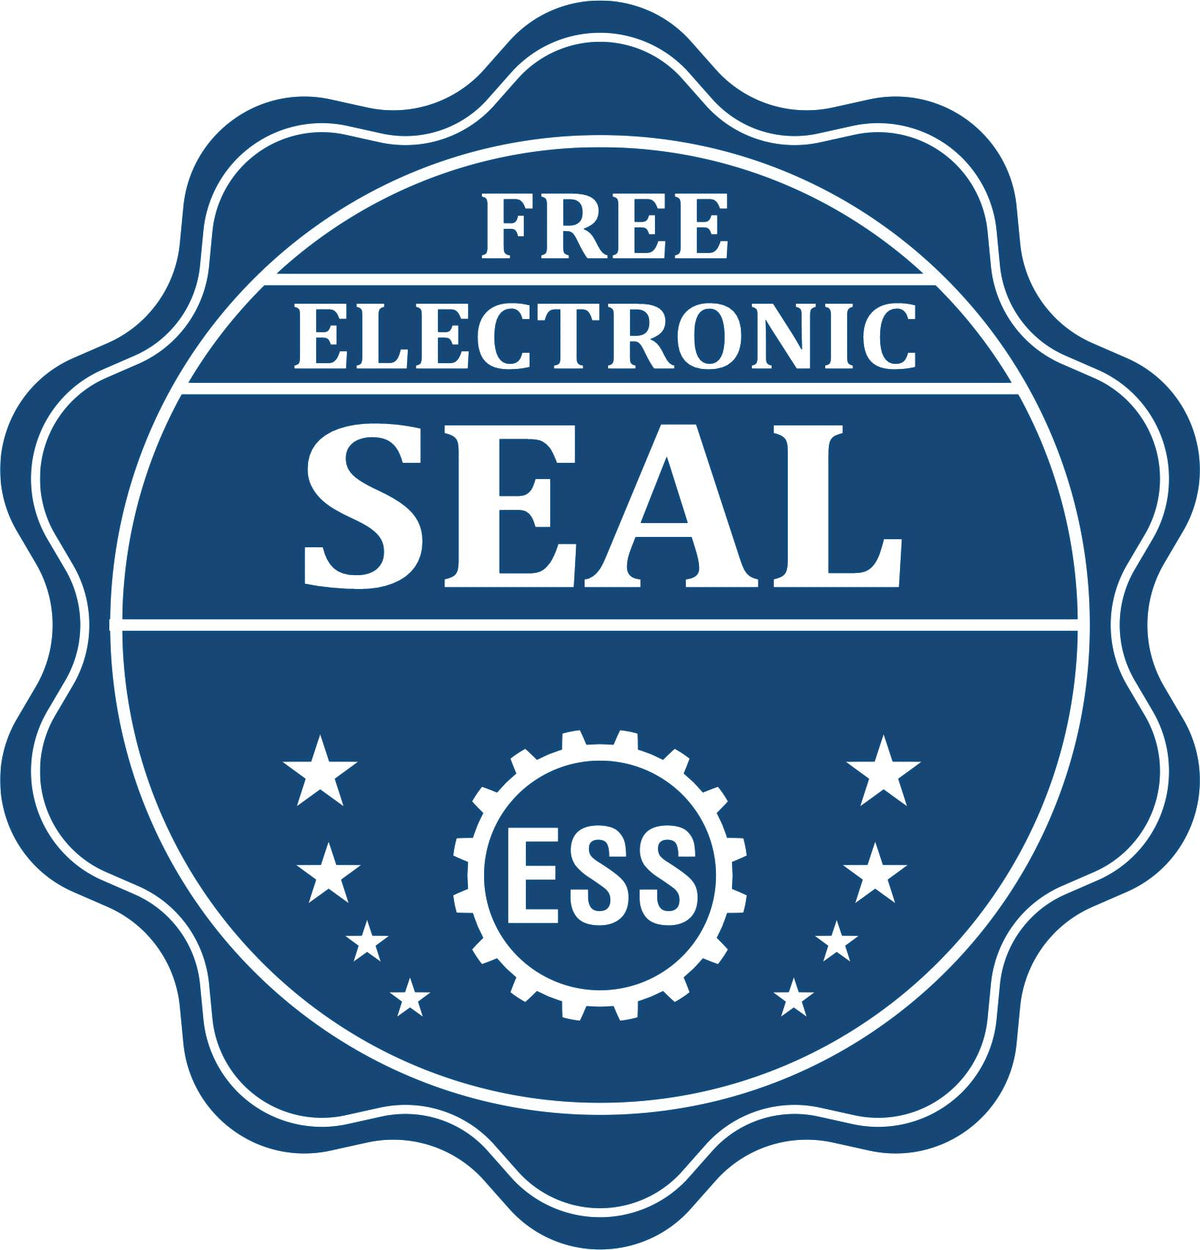 A badge showing a free electronic seal for the State of Colorado Soft Land Surveyor Embossing Seal with stars and the ESS gear on the emblem.